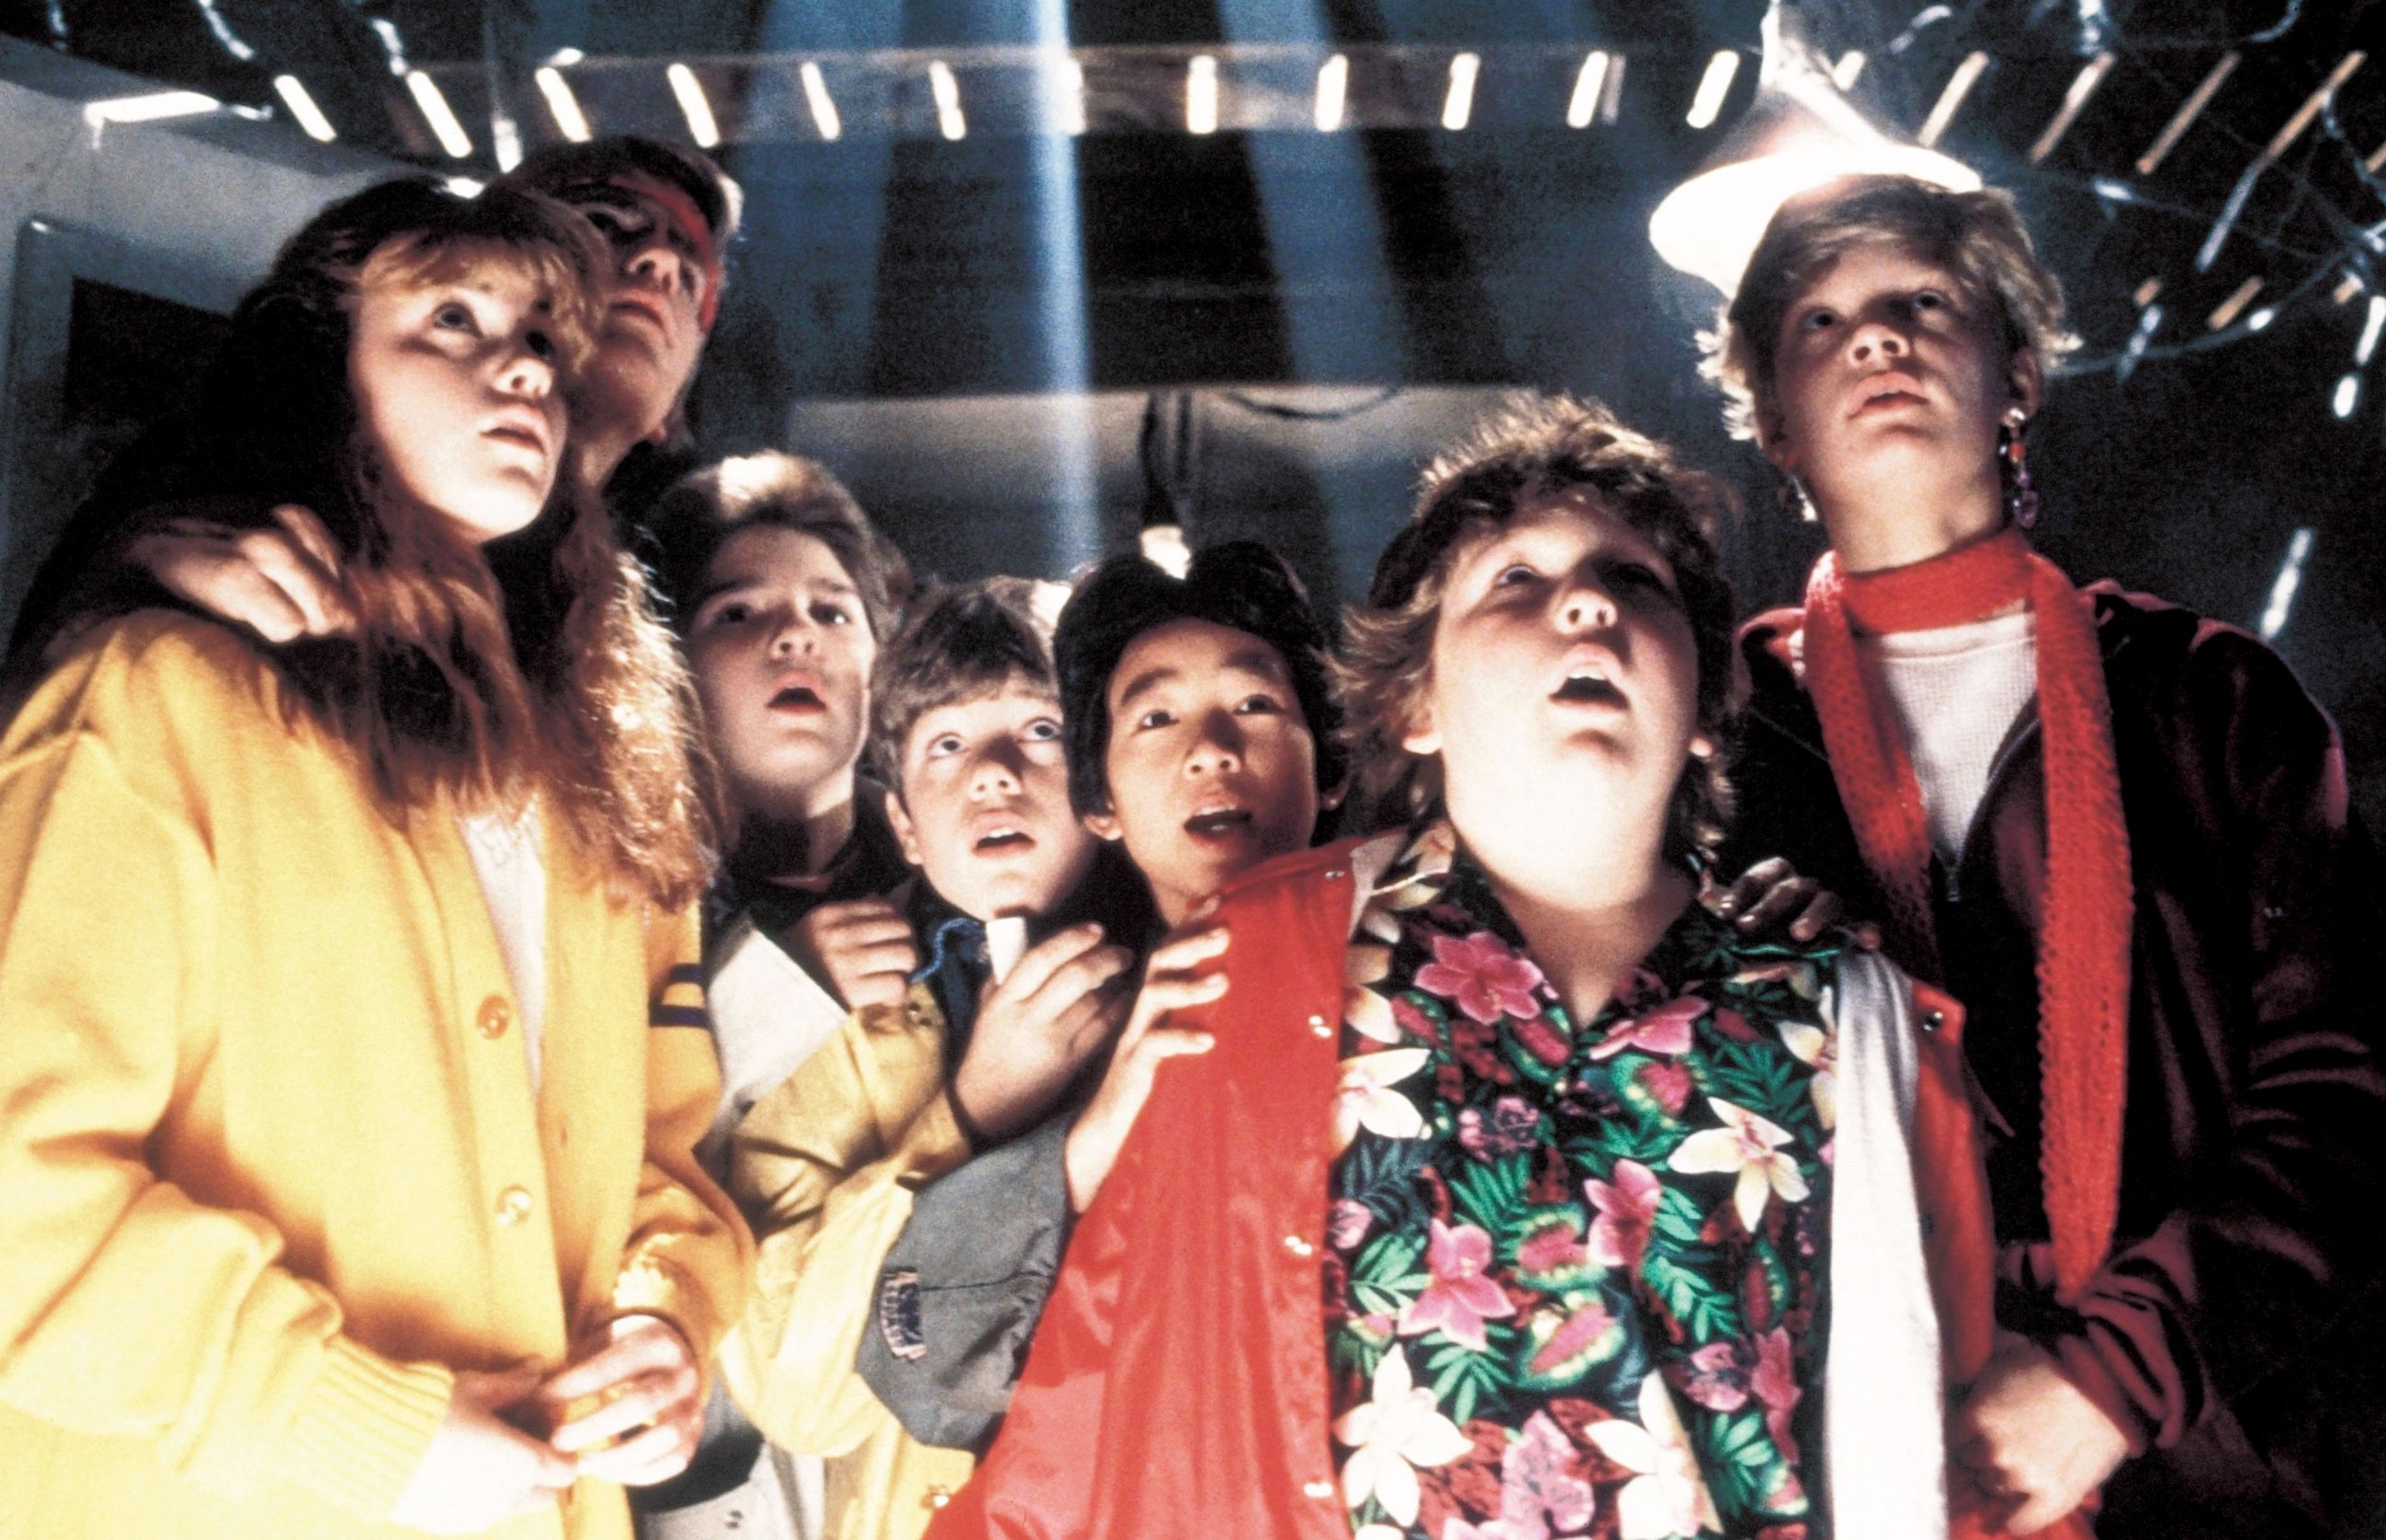 PHOTO: The cast of "The Goonies" in scene from the movie.